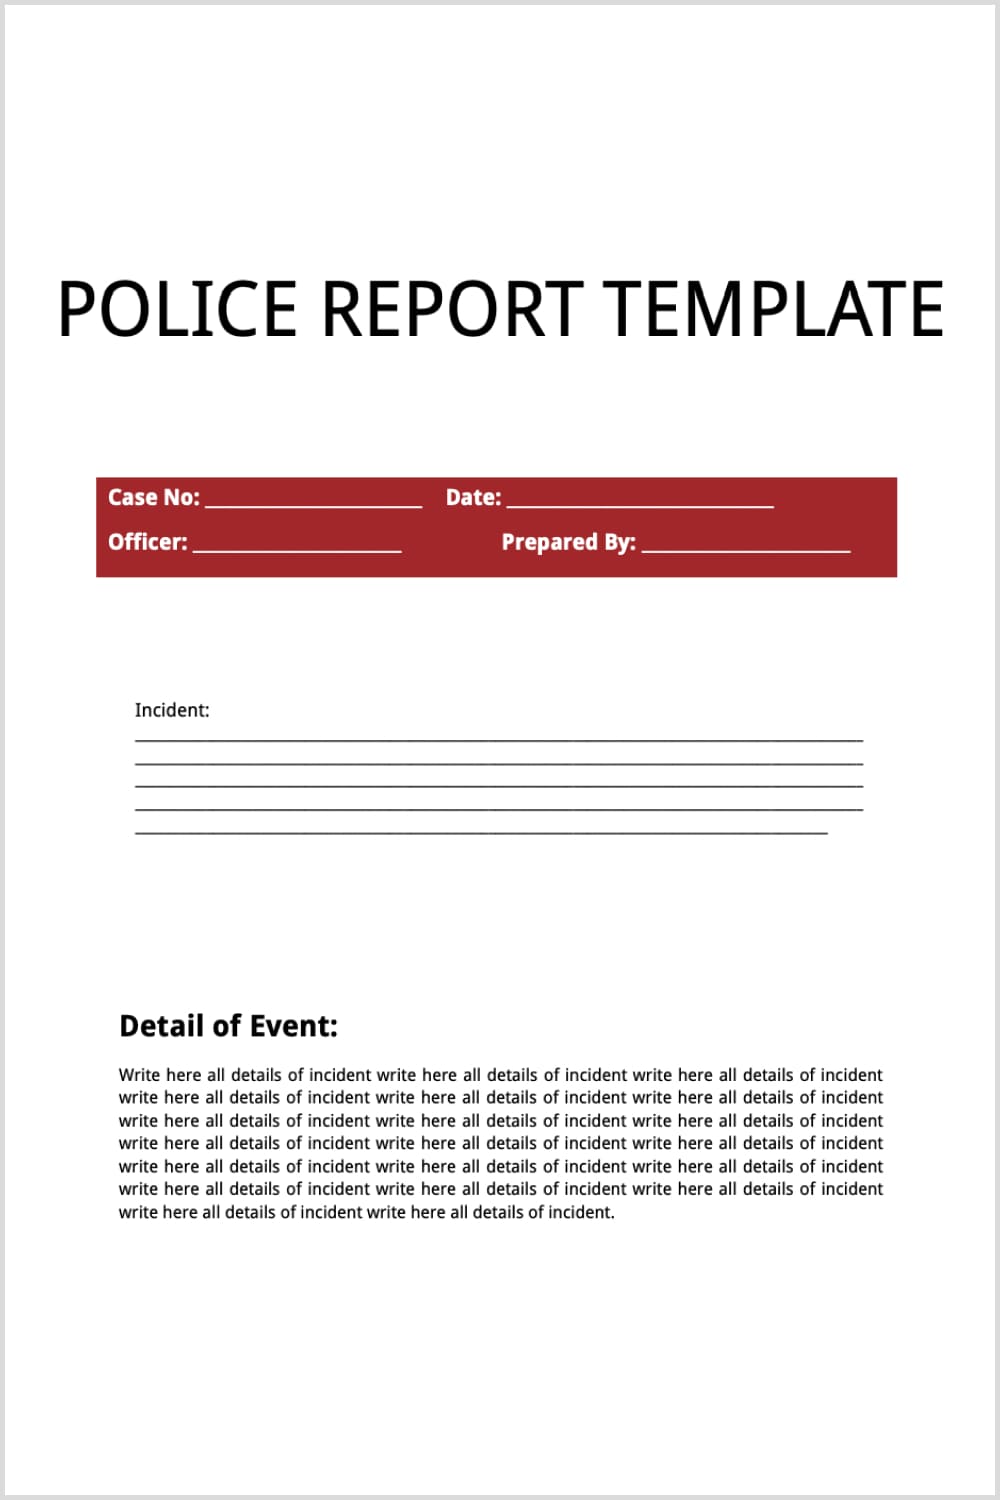 Police Report Template With a red stripe and a description of the incident.